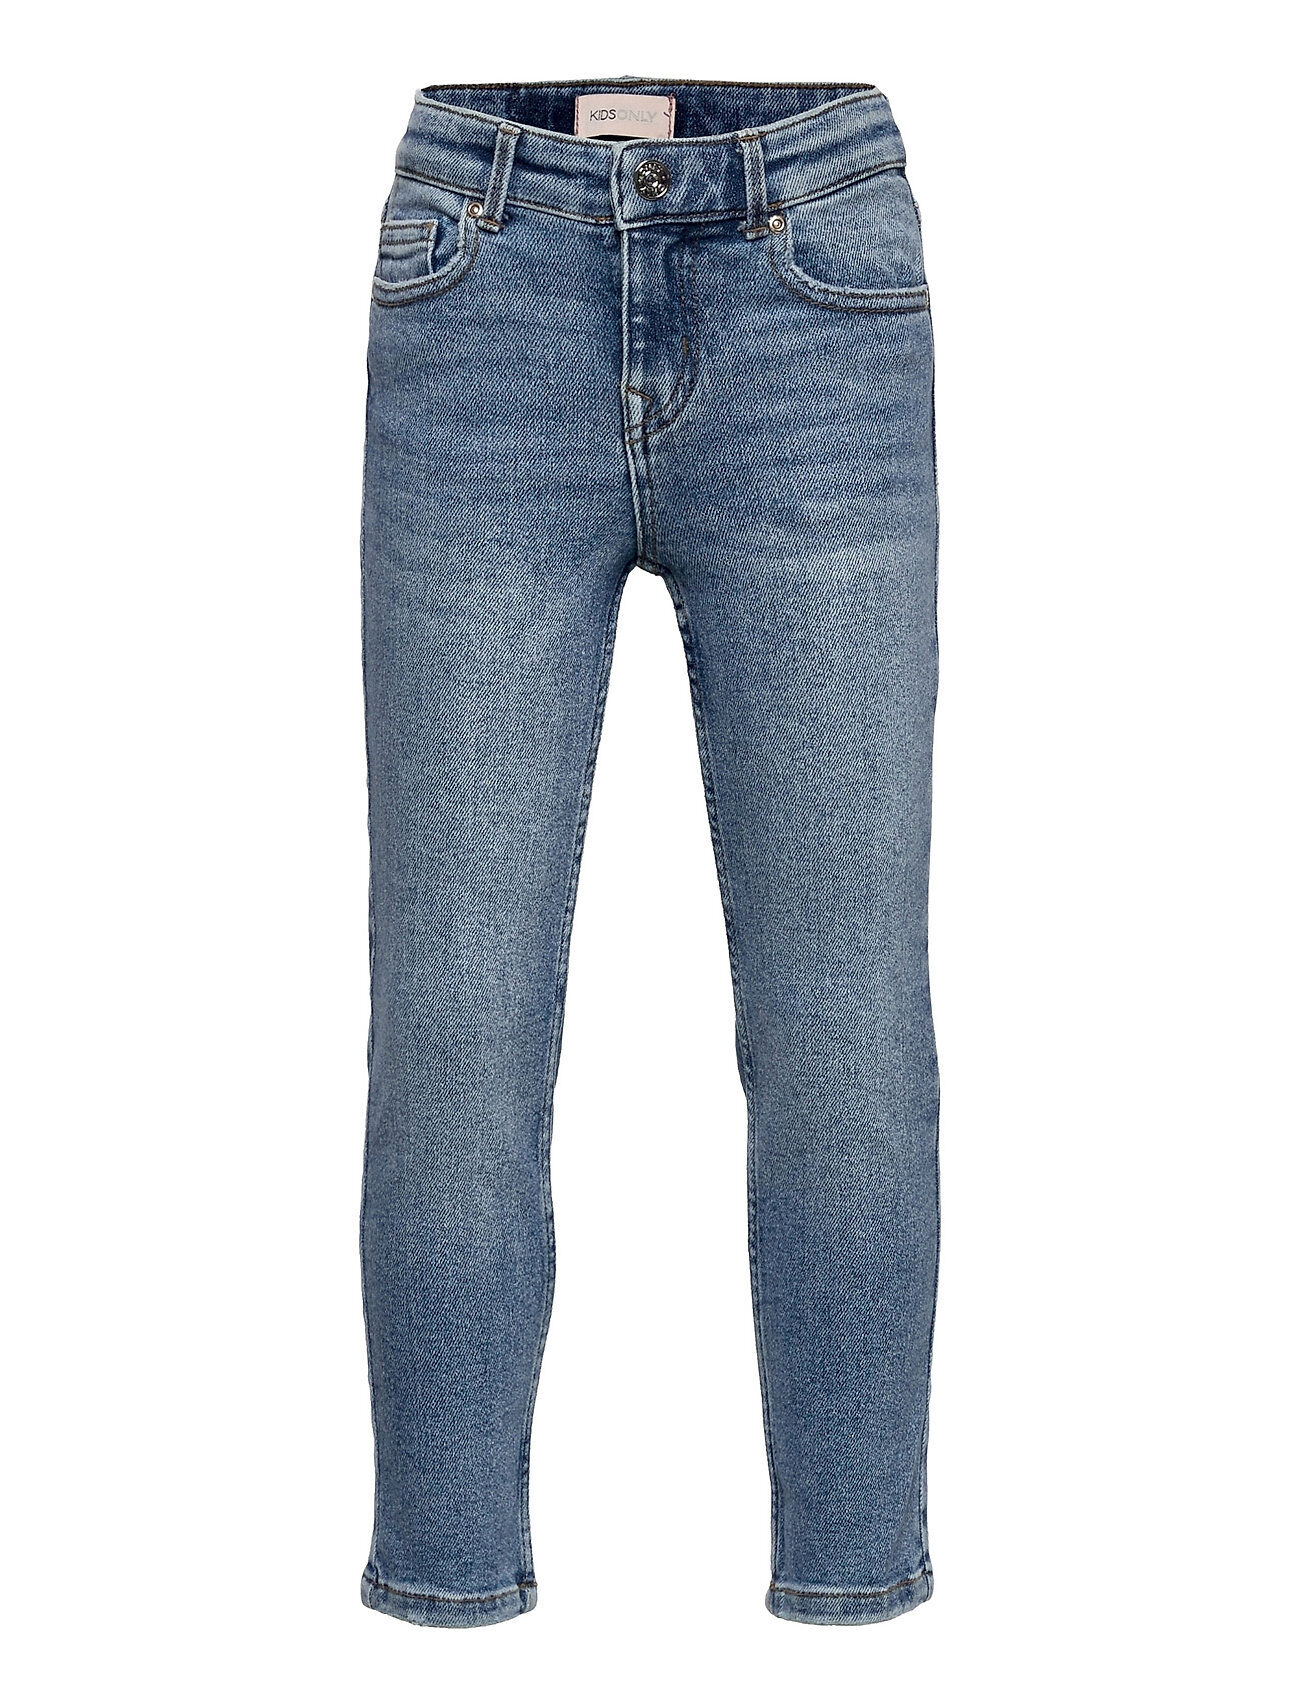 Kids Only K Rica Life Mid St Ank Mae040 Jeans Blå Kids Only